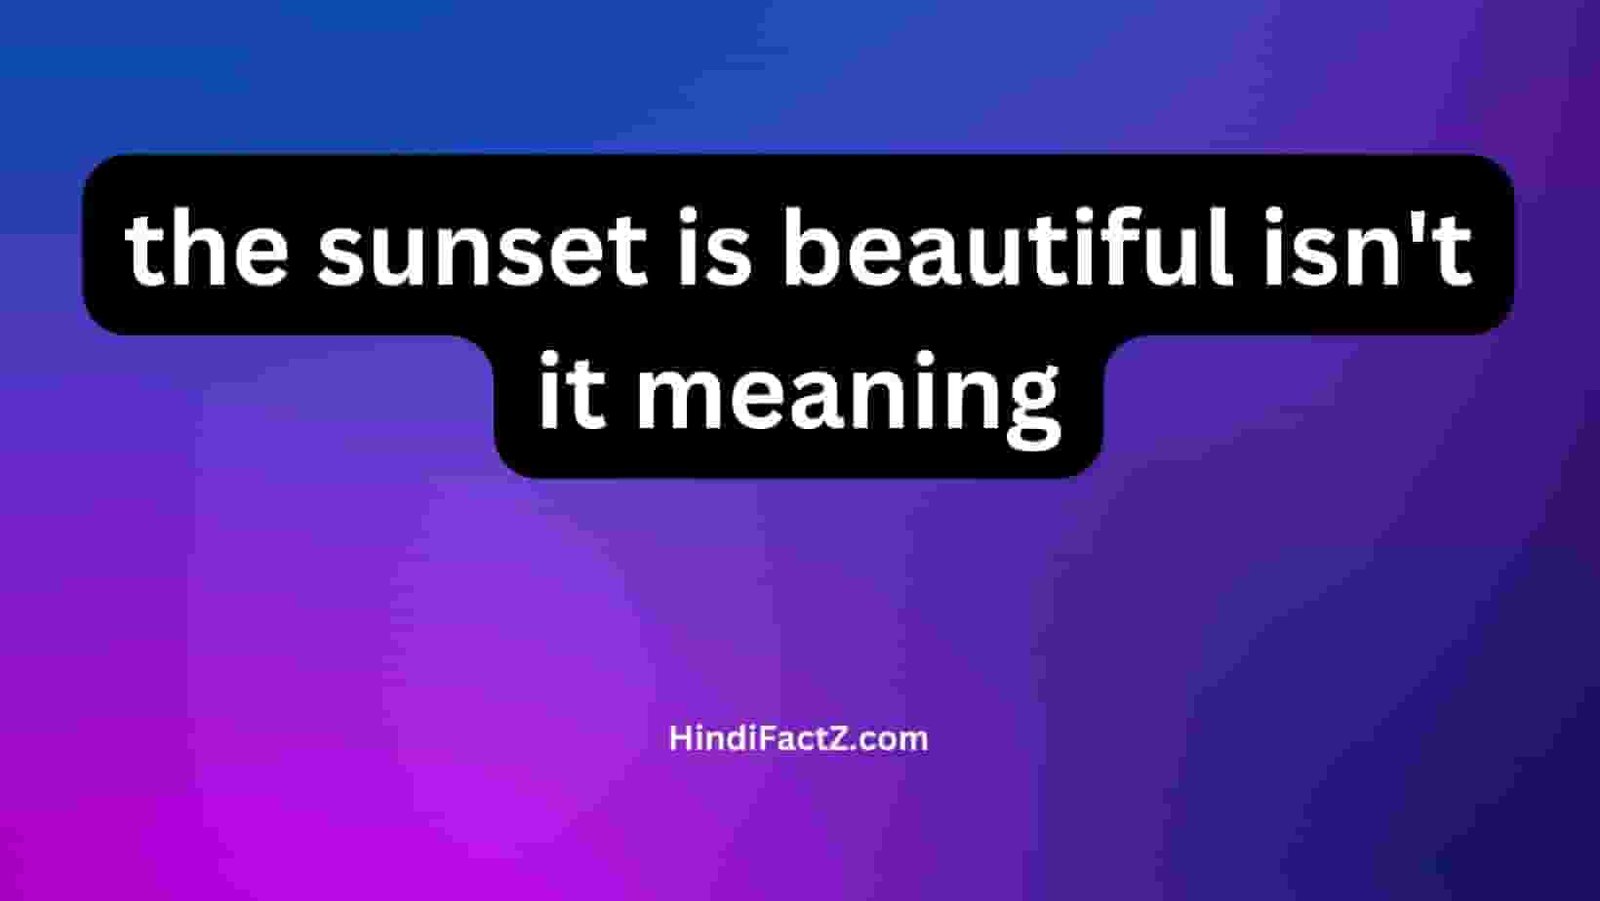 the sunset is beautiful isn't it meaning